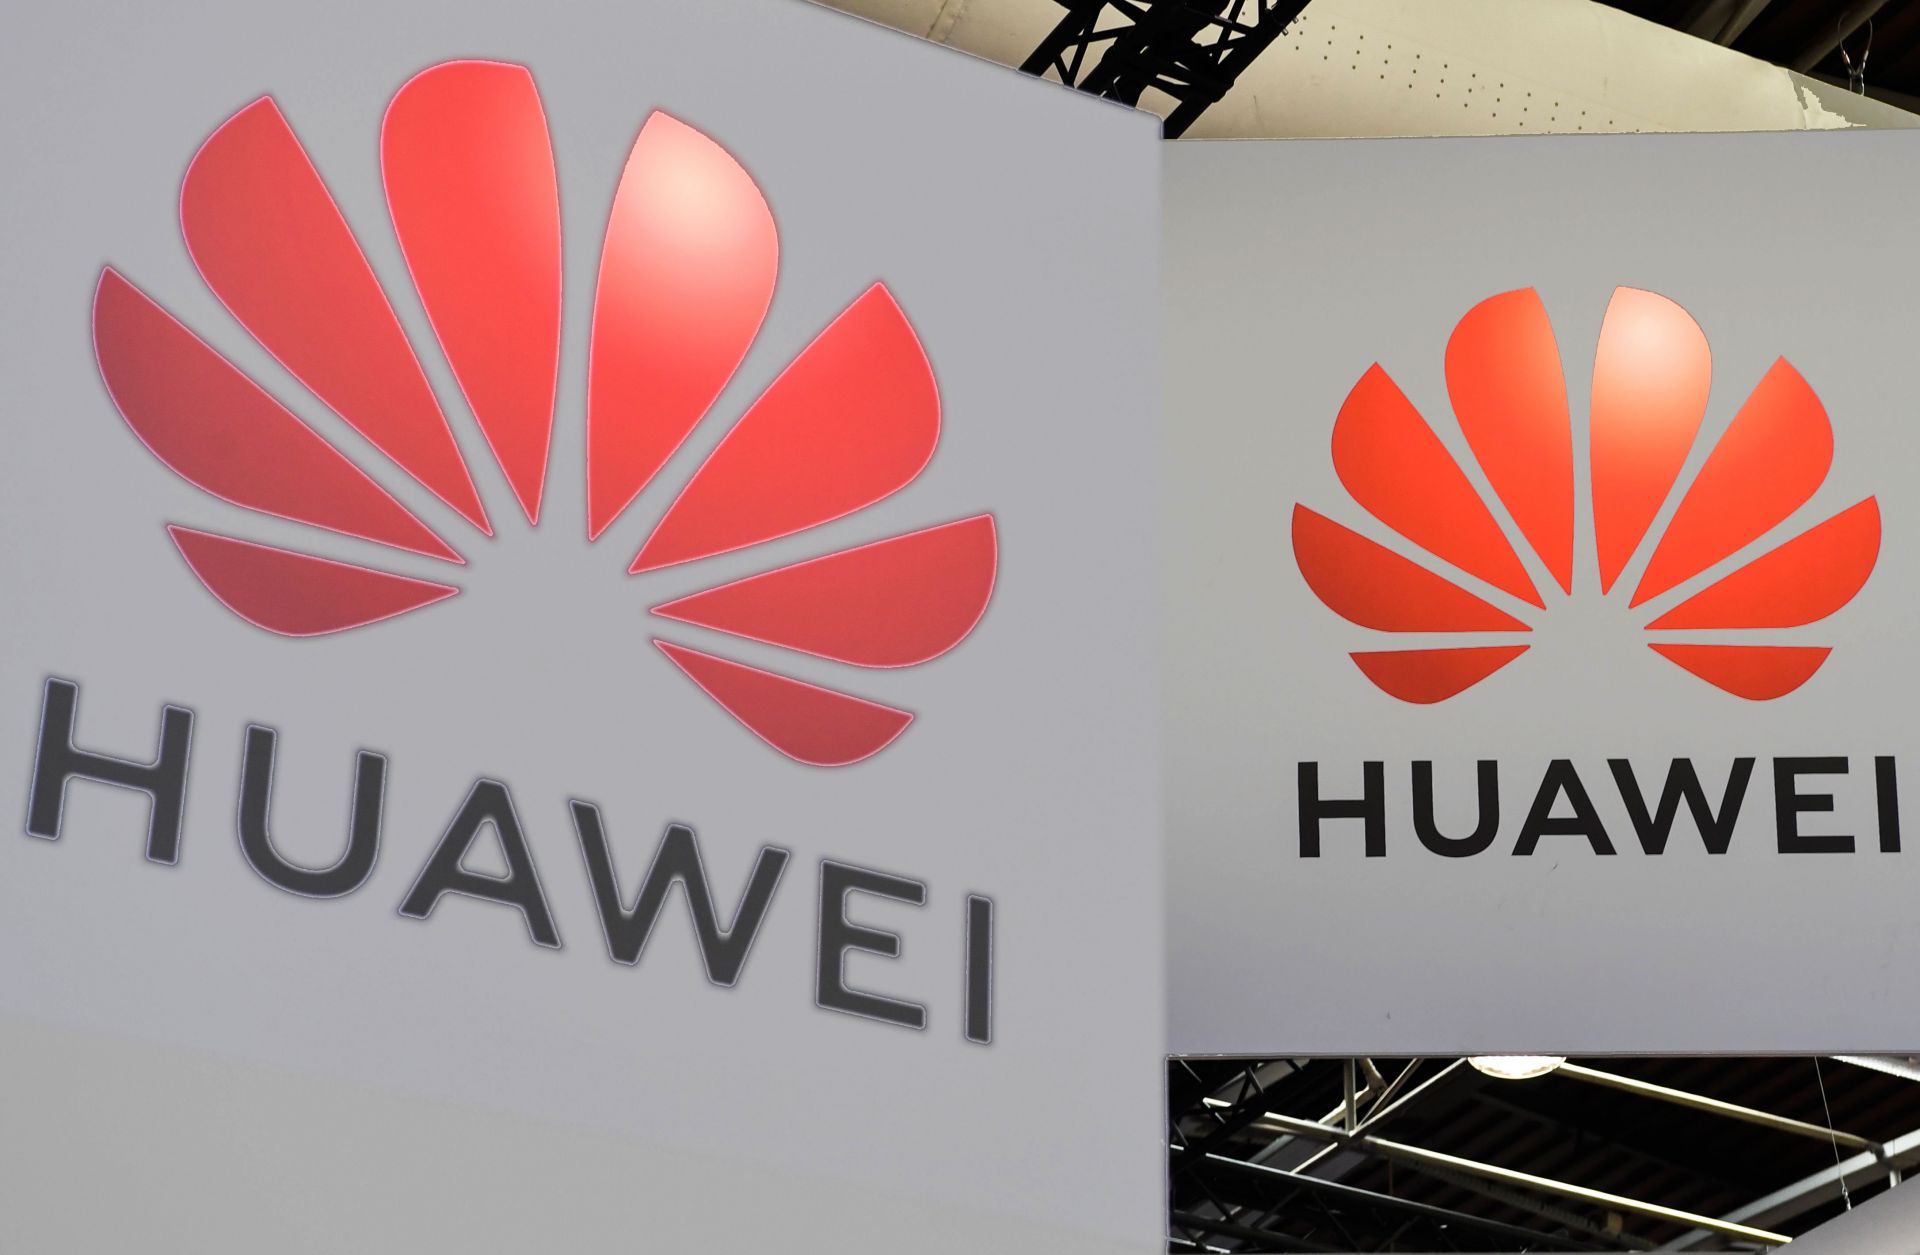 The Huawei logo is displayed at the annual VivaTech conference in Paris on May 16, 2019.